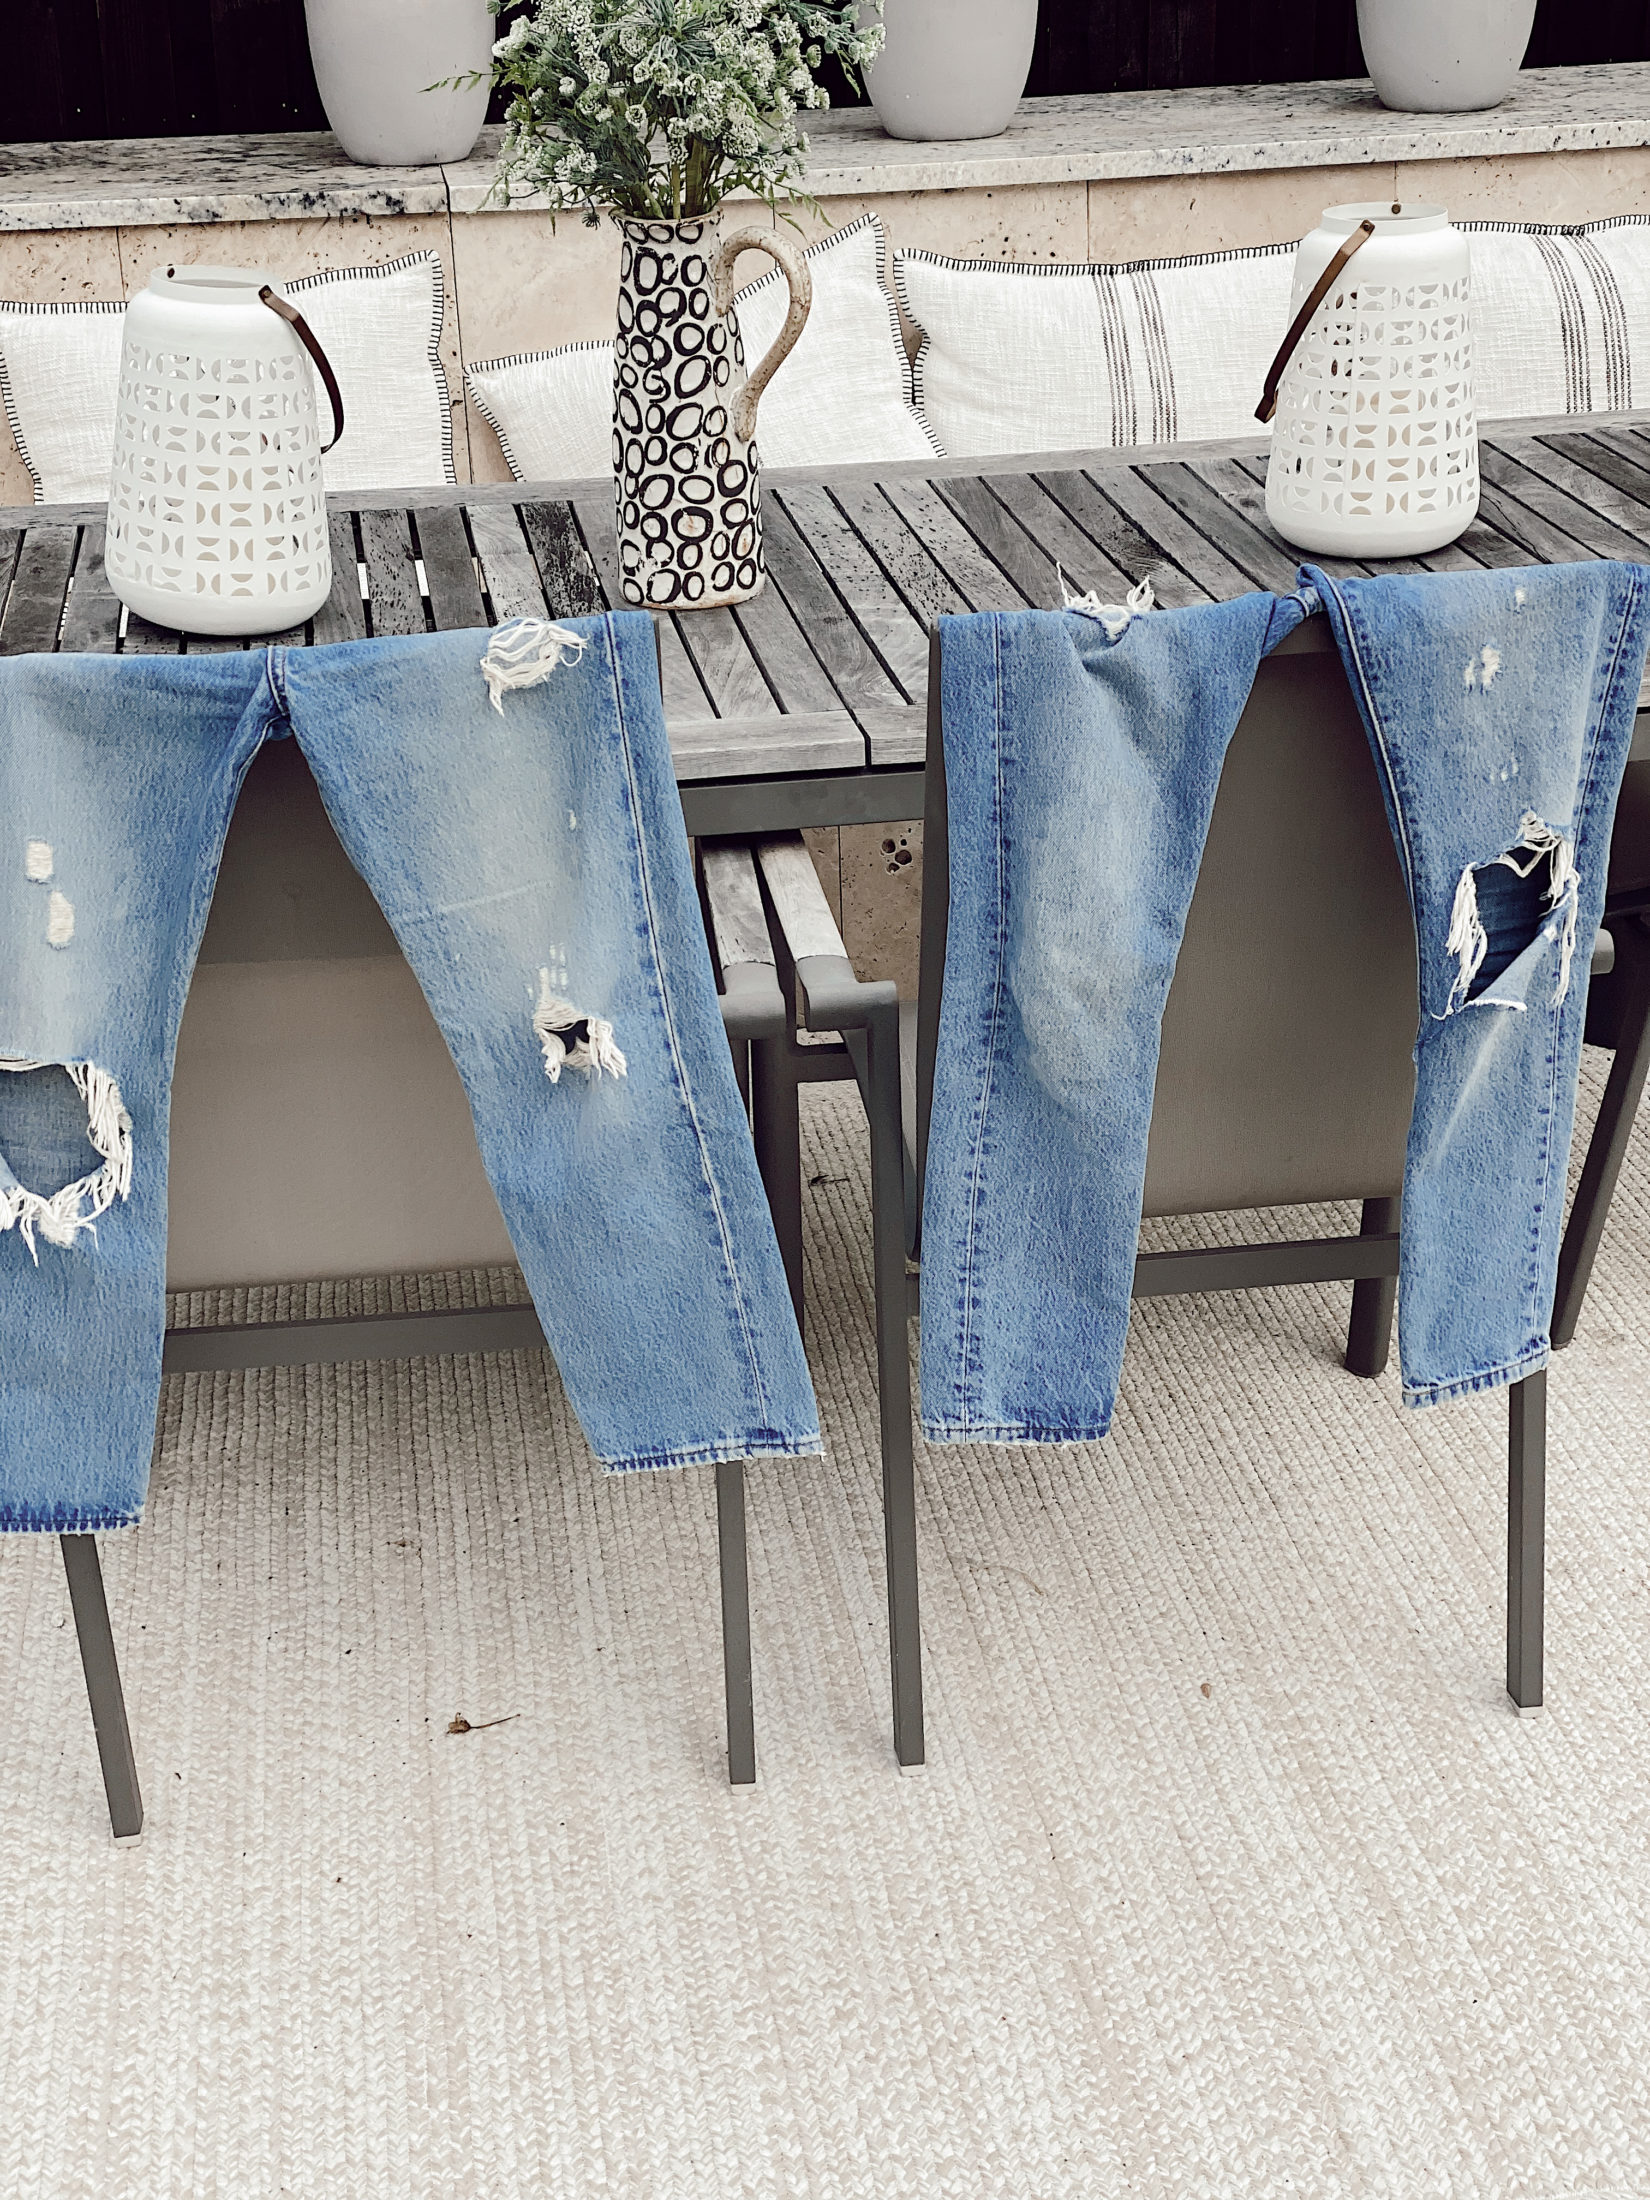 how to keep jeans clean without washing them